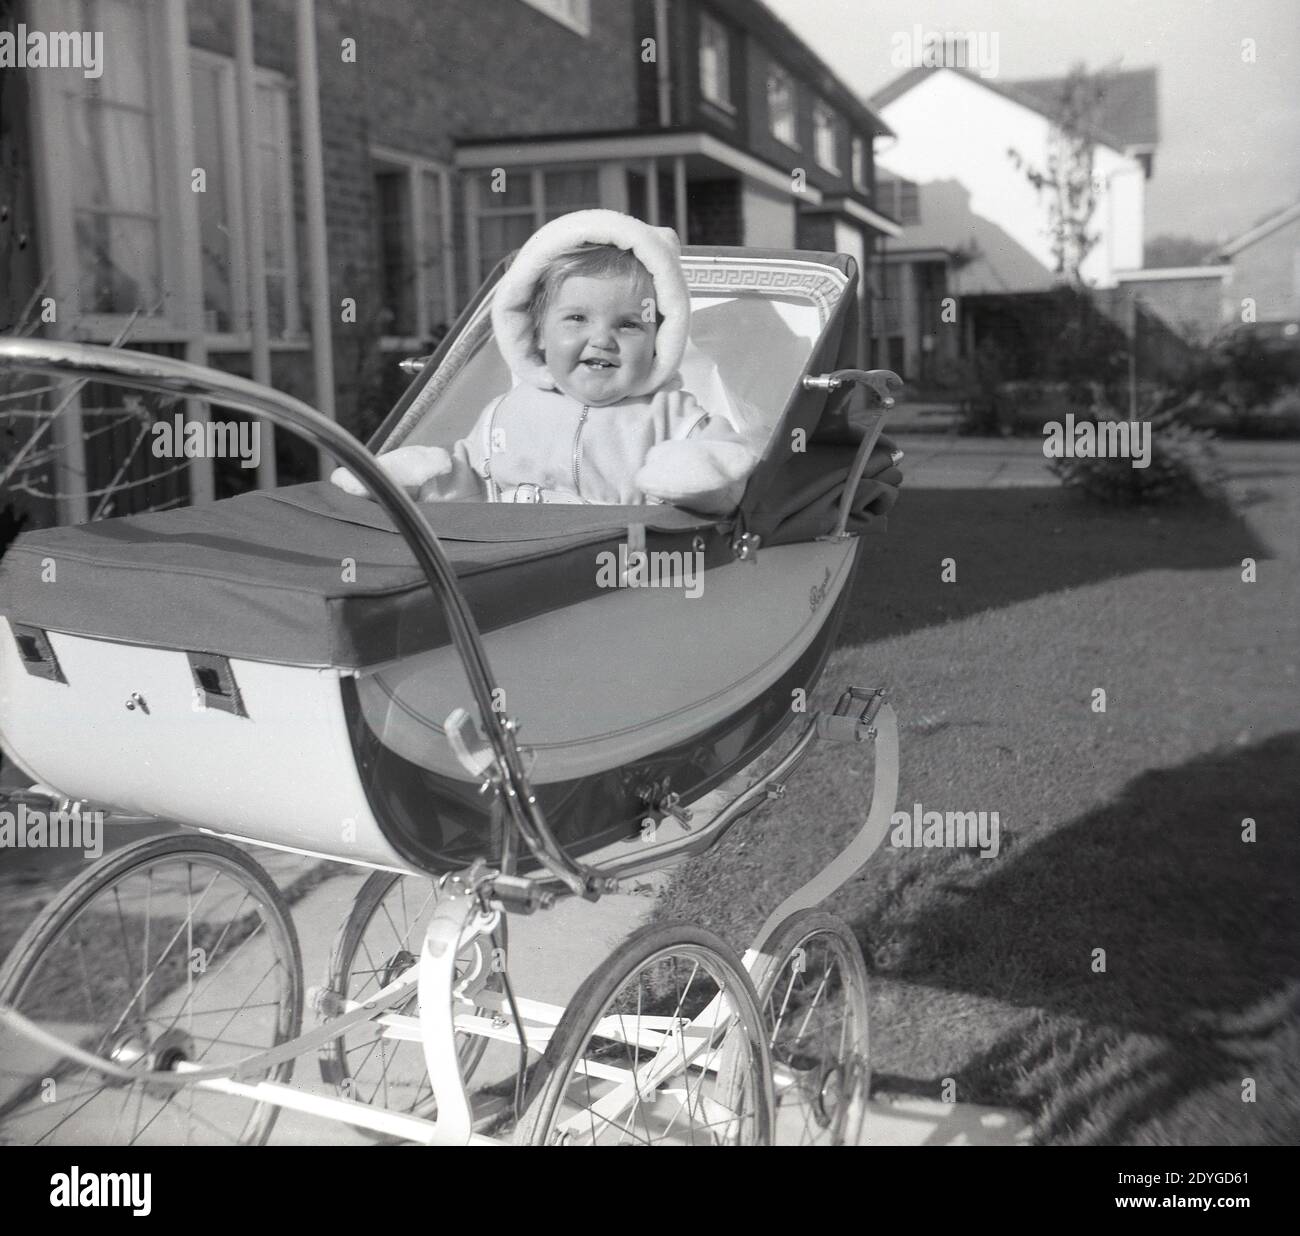 1960s, historical, outside in the fresh air, an infant child sitting in an elegant two-tone coach-built pram or baby carriage of the era, a Royale, Made in England. With its high, spring-suspension body and large spoke wheels behind smaller wheels, the Royale of London was a luxury coach-built pram. Royale was the brand name of the 'Royale Baby Carriage Co' of Nunhead Grove, London, founded in 1930 by brothers Alf & Frank Saward. Beautiful baby carriages such as the Royale declined in use from the 1970s as cheaper, ligther prams and more convenient collapsible prams took over the market. Stock Photo